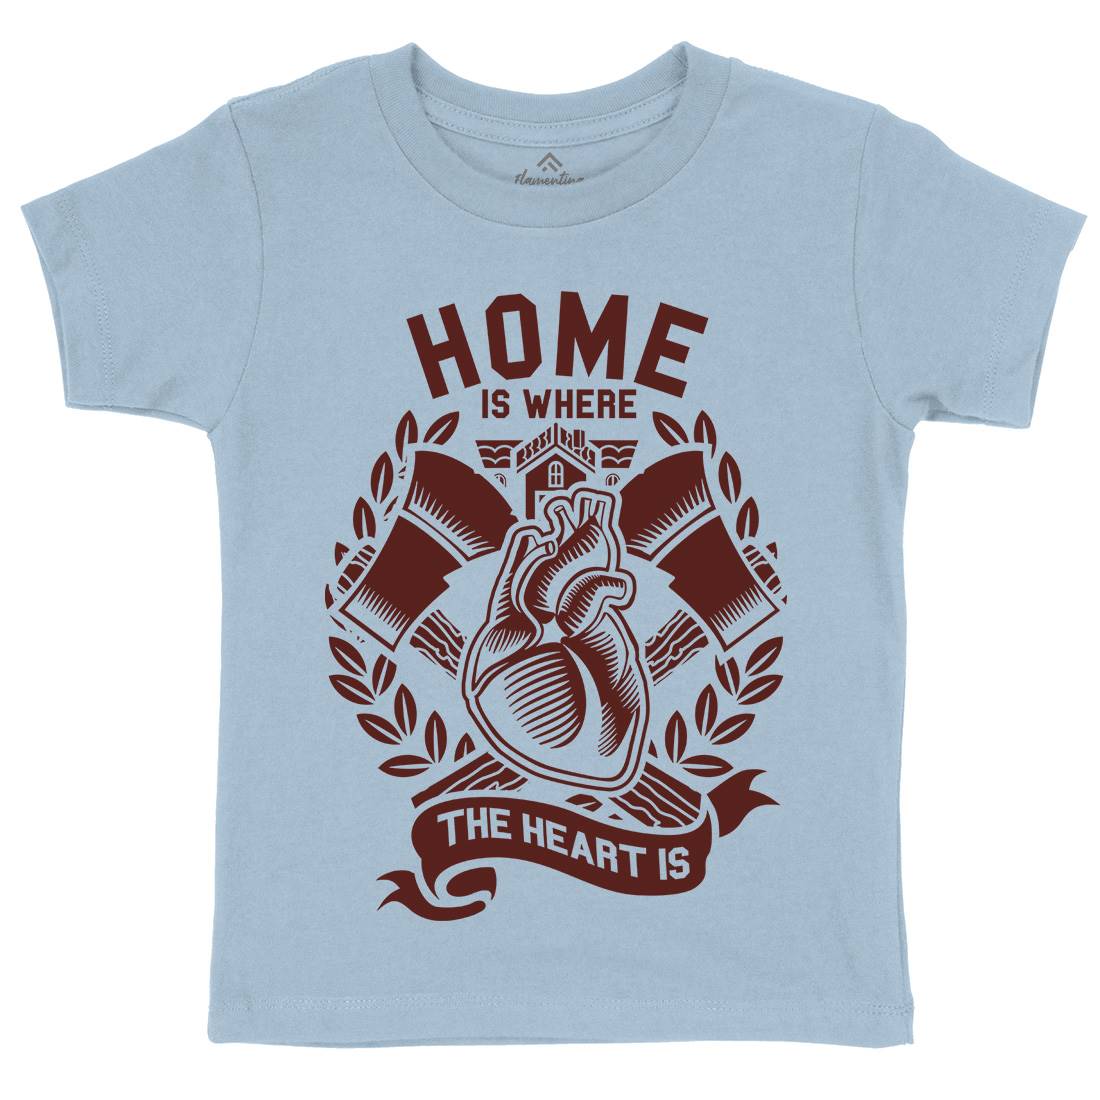 Home Kids Organic Crew Neck T-Shirt Quotes A241